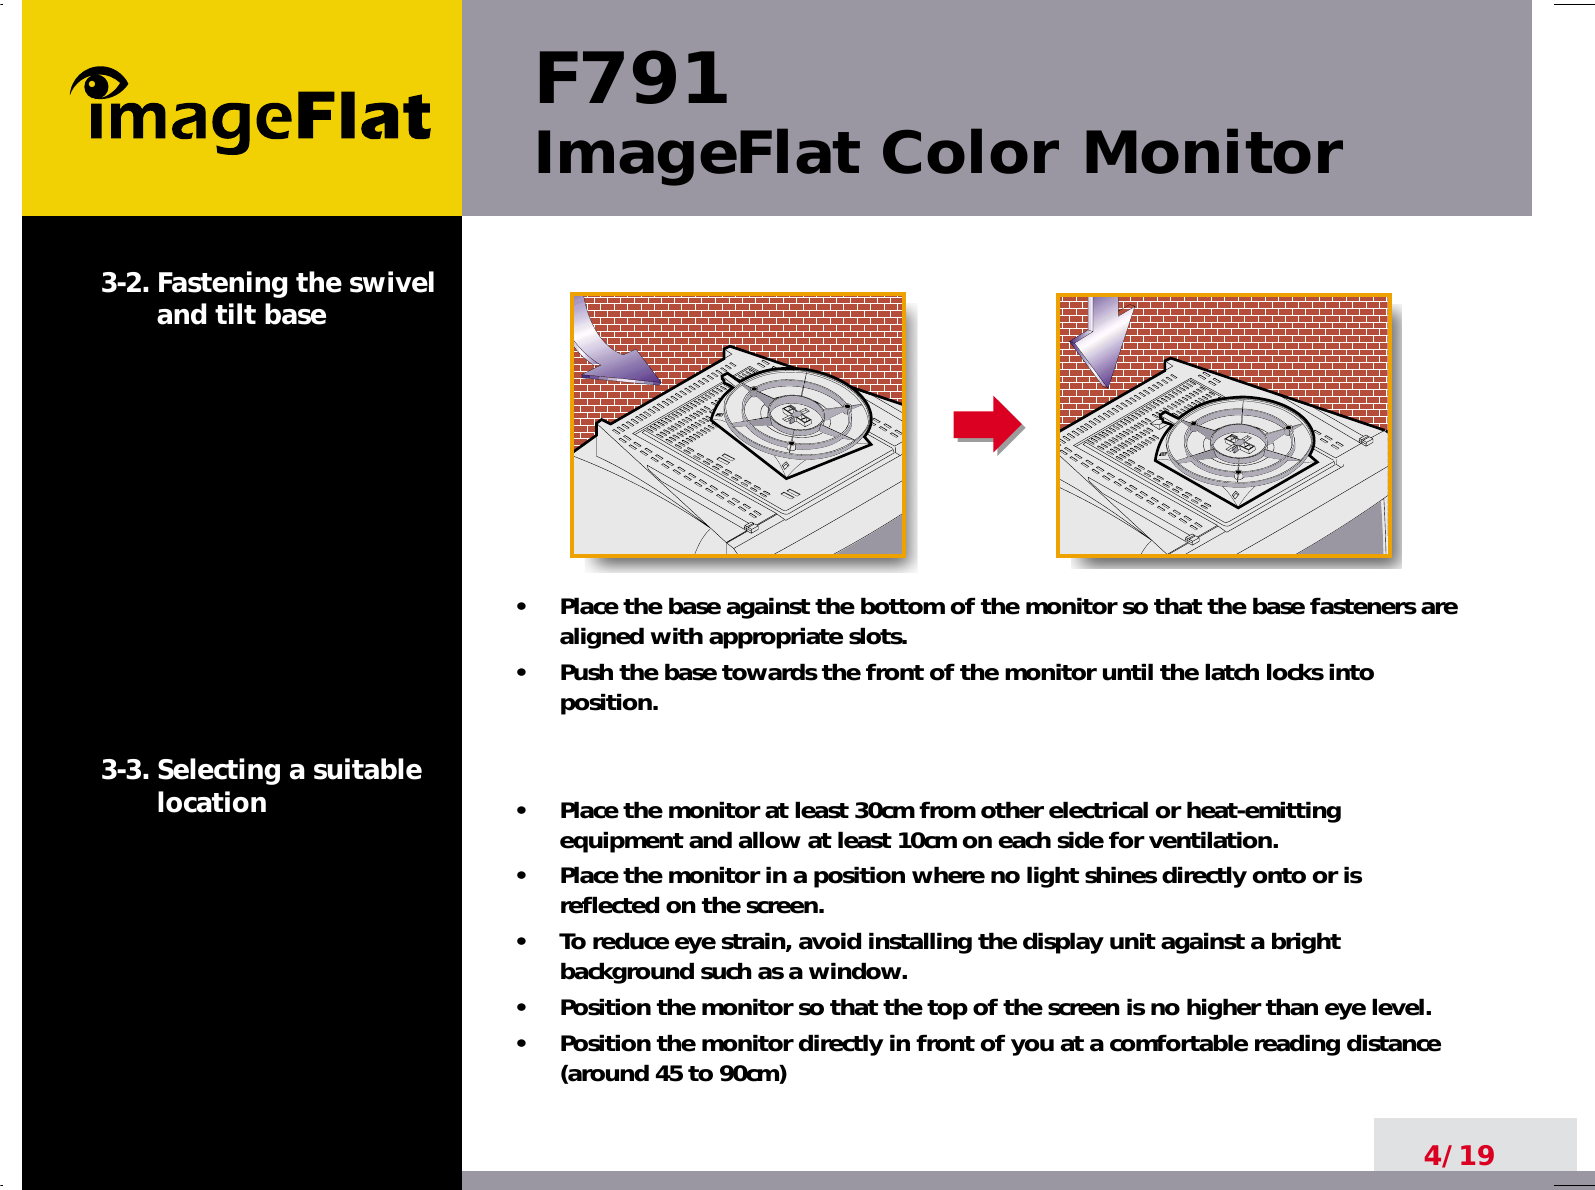 F791ImageFlat Color Monitor4/193-2. Fastening the swiveland tilt base3-3. Selecting a suitablelocation•     Place the base against the bottom of the monitor so that the base fasteners arealigned with appropriate slots.•     Push the base towards the front of the monitor until the latch locks intoposition.•     Place the monitor at least 30cm from other electrical or heat-emittingequipment and allow at least 10cm on each side for ventilation.•     Place the monitor in a position where no light shines directly onto or isreflected on the screen.•     To reduce eye strain, avoid installing the display unit against a brightbackground such as a window.•     Position the monitor so that the top of the screen is no higher than eye level.•     Position the monitor directly in front of you at a comfortable reading distance(around 45 to 90cm) 